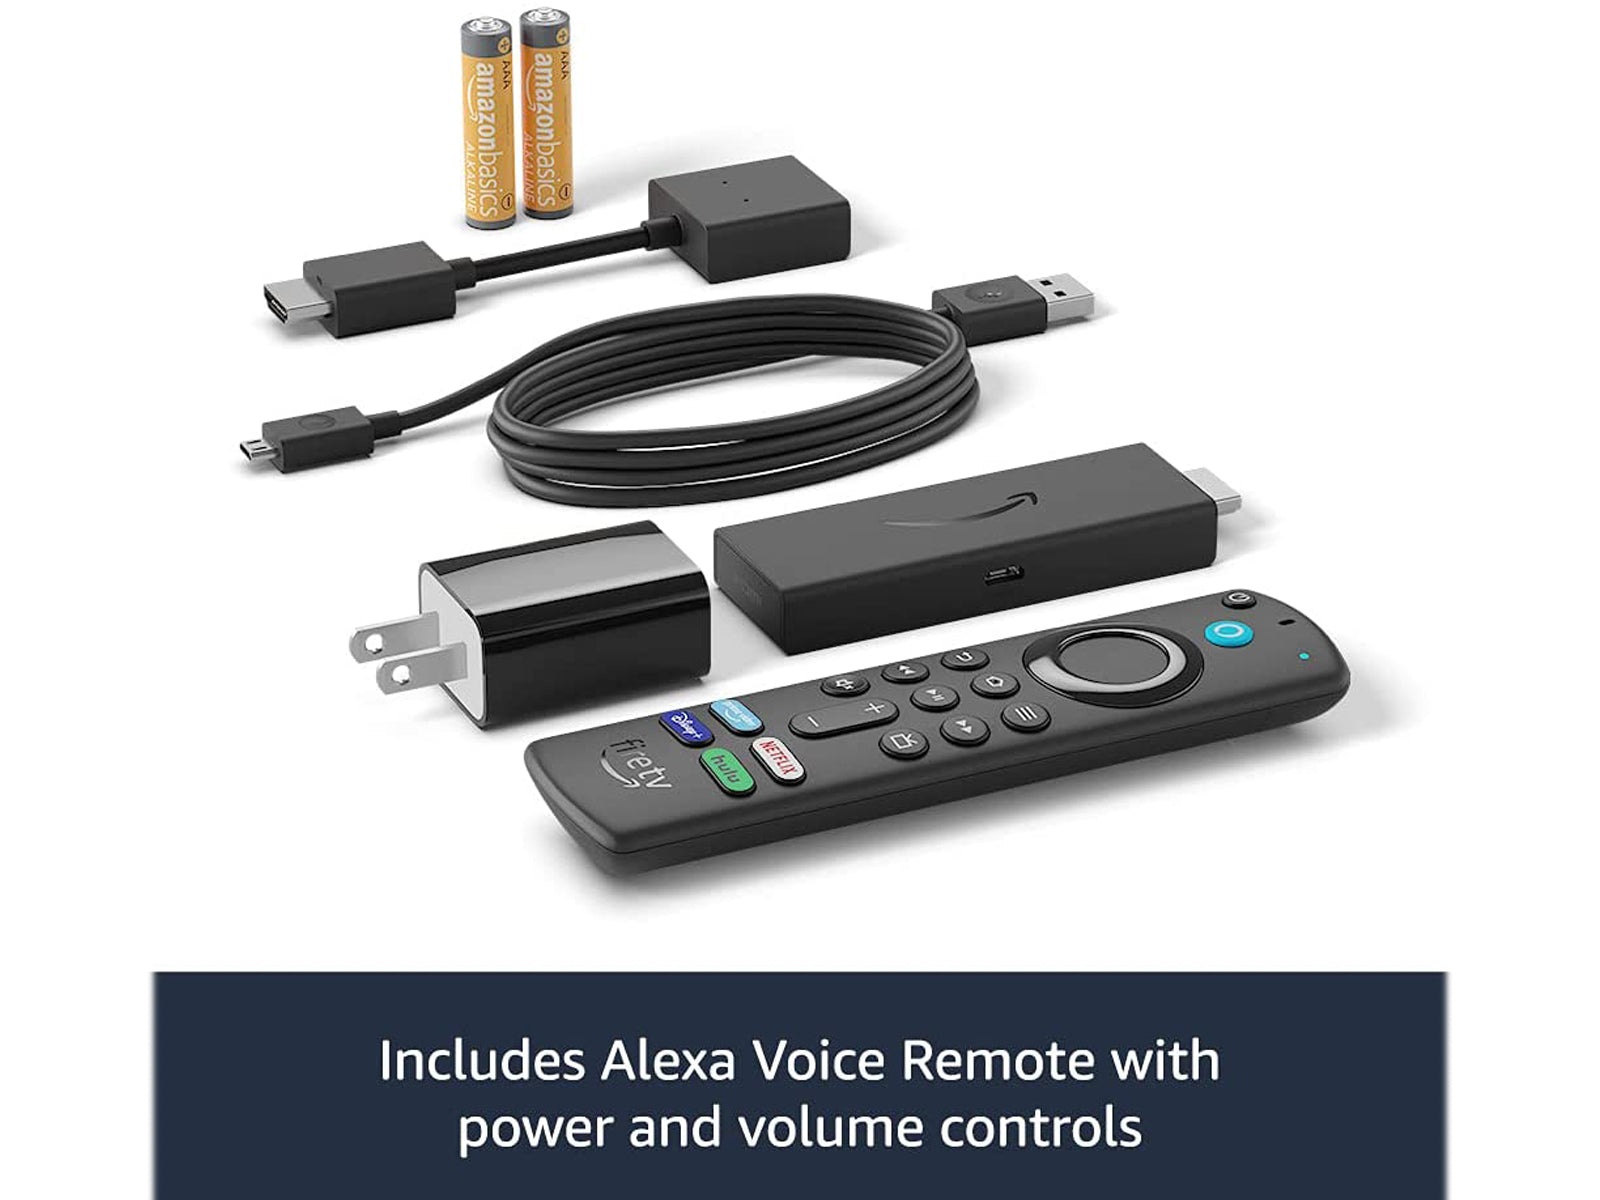 Image shows all items included with the Amazon Fire TV Stick 4K 2021